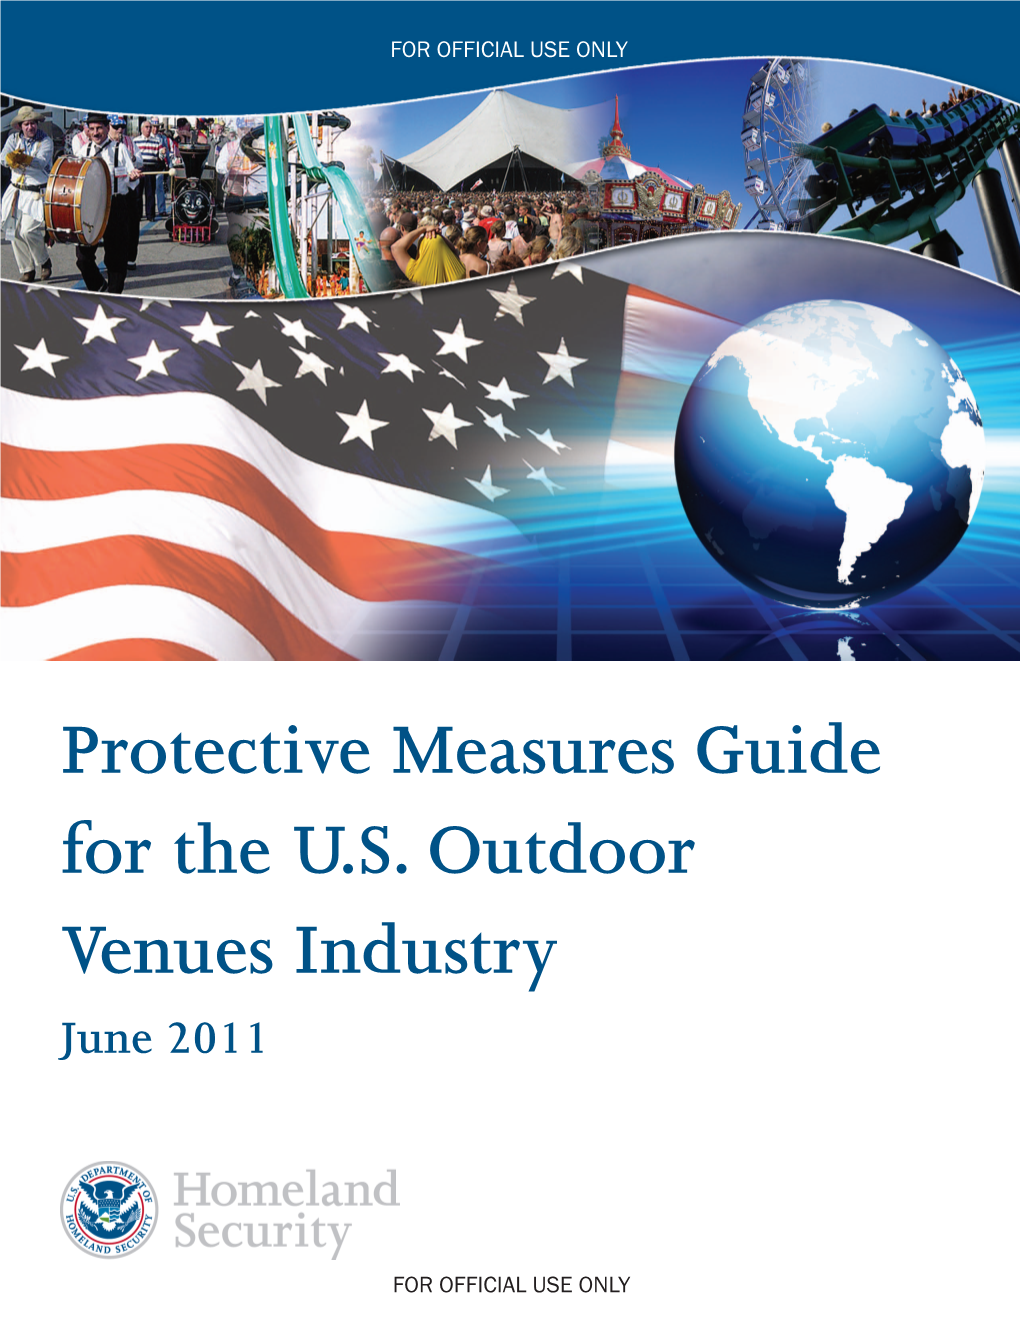 Protective Measures Guide for the U.S. Outdoor Venues Industry June 2011